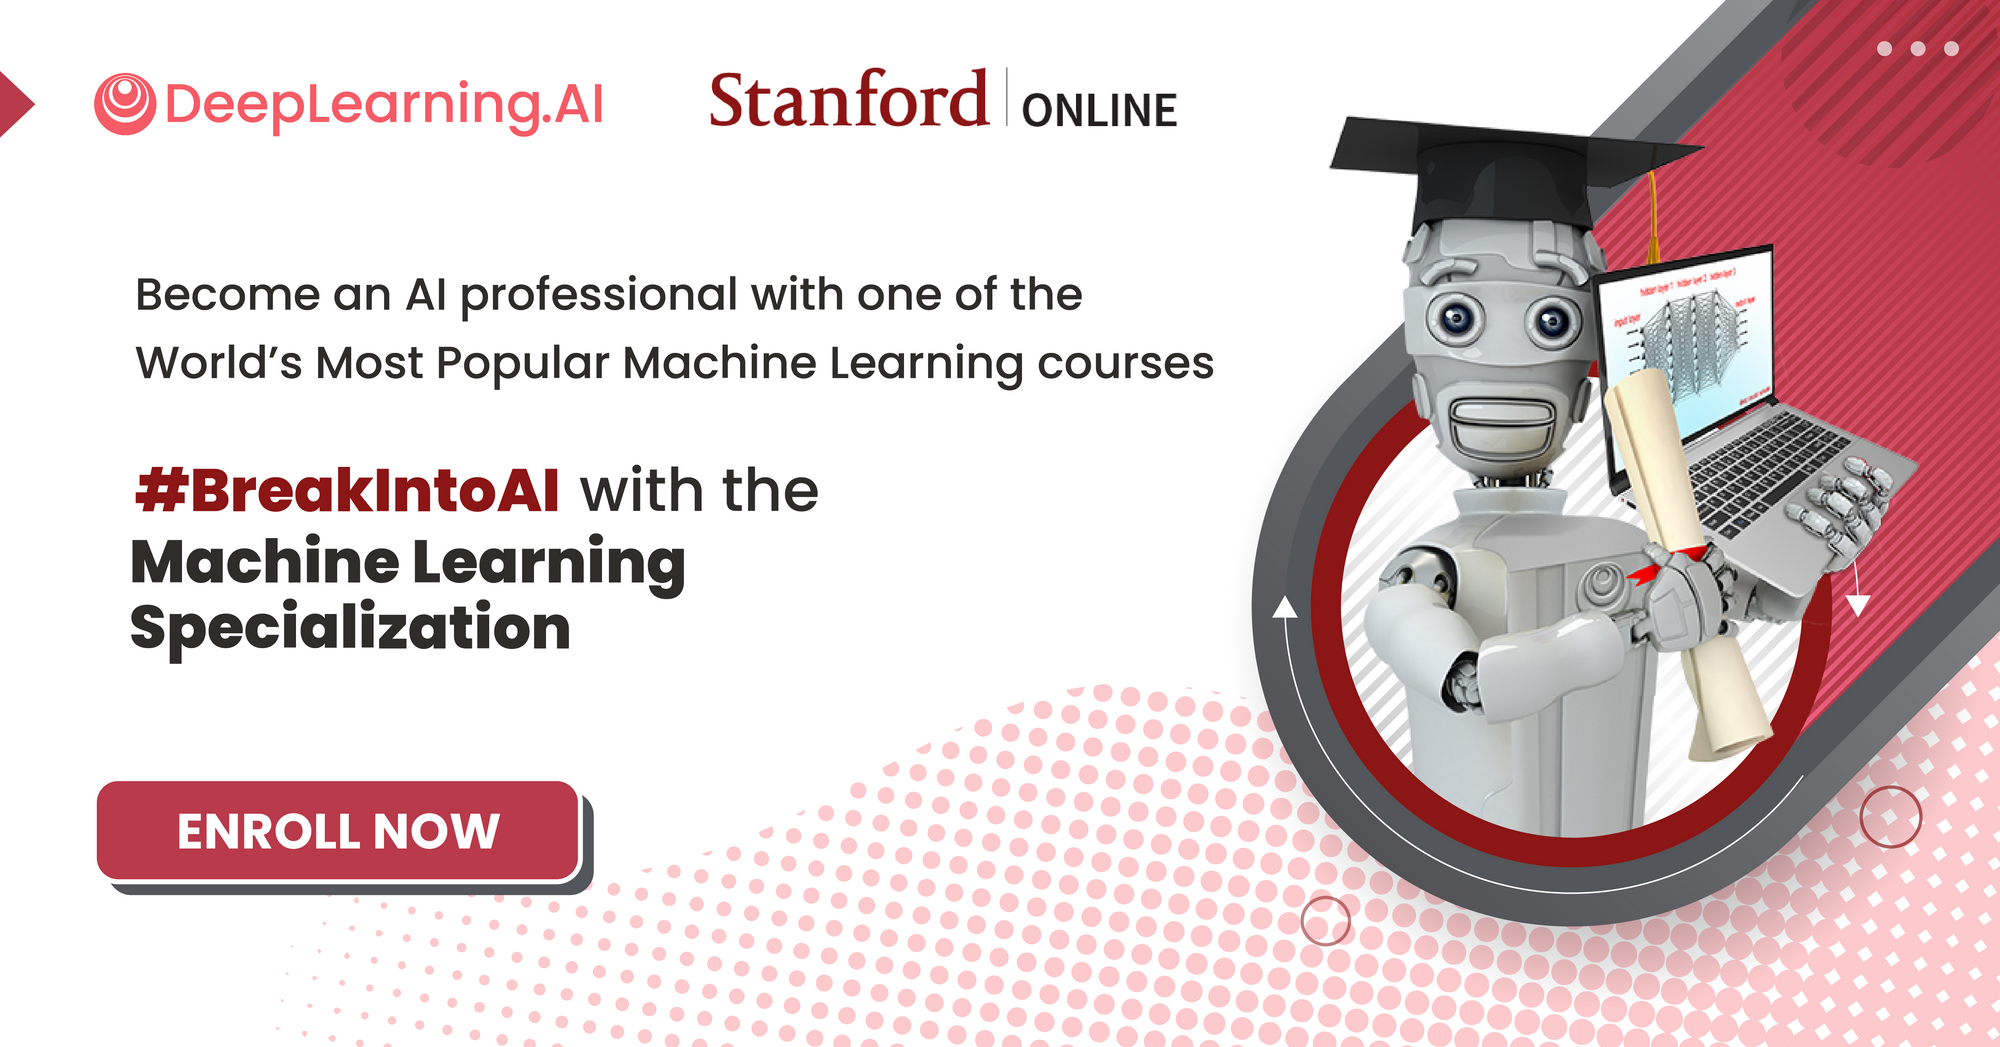 Banner ad for the Machine Learning Specialization offered by DeepLearning.AI